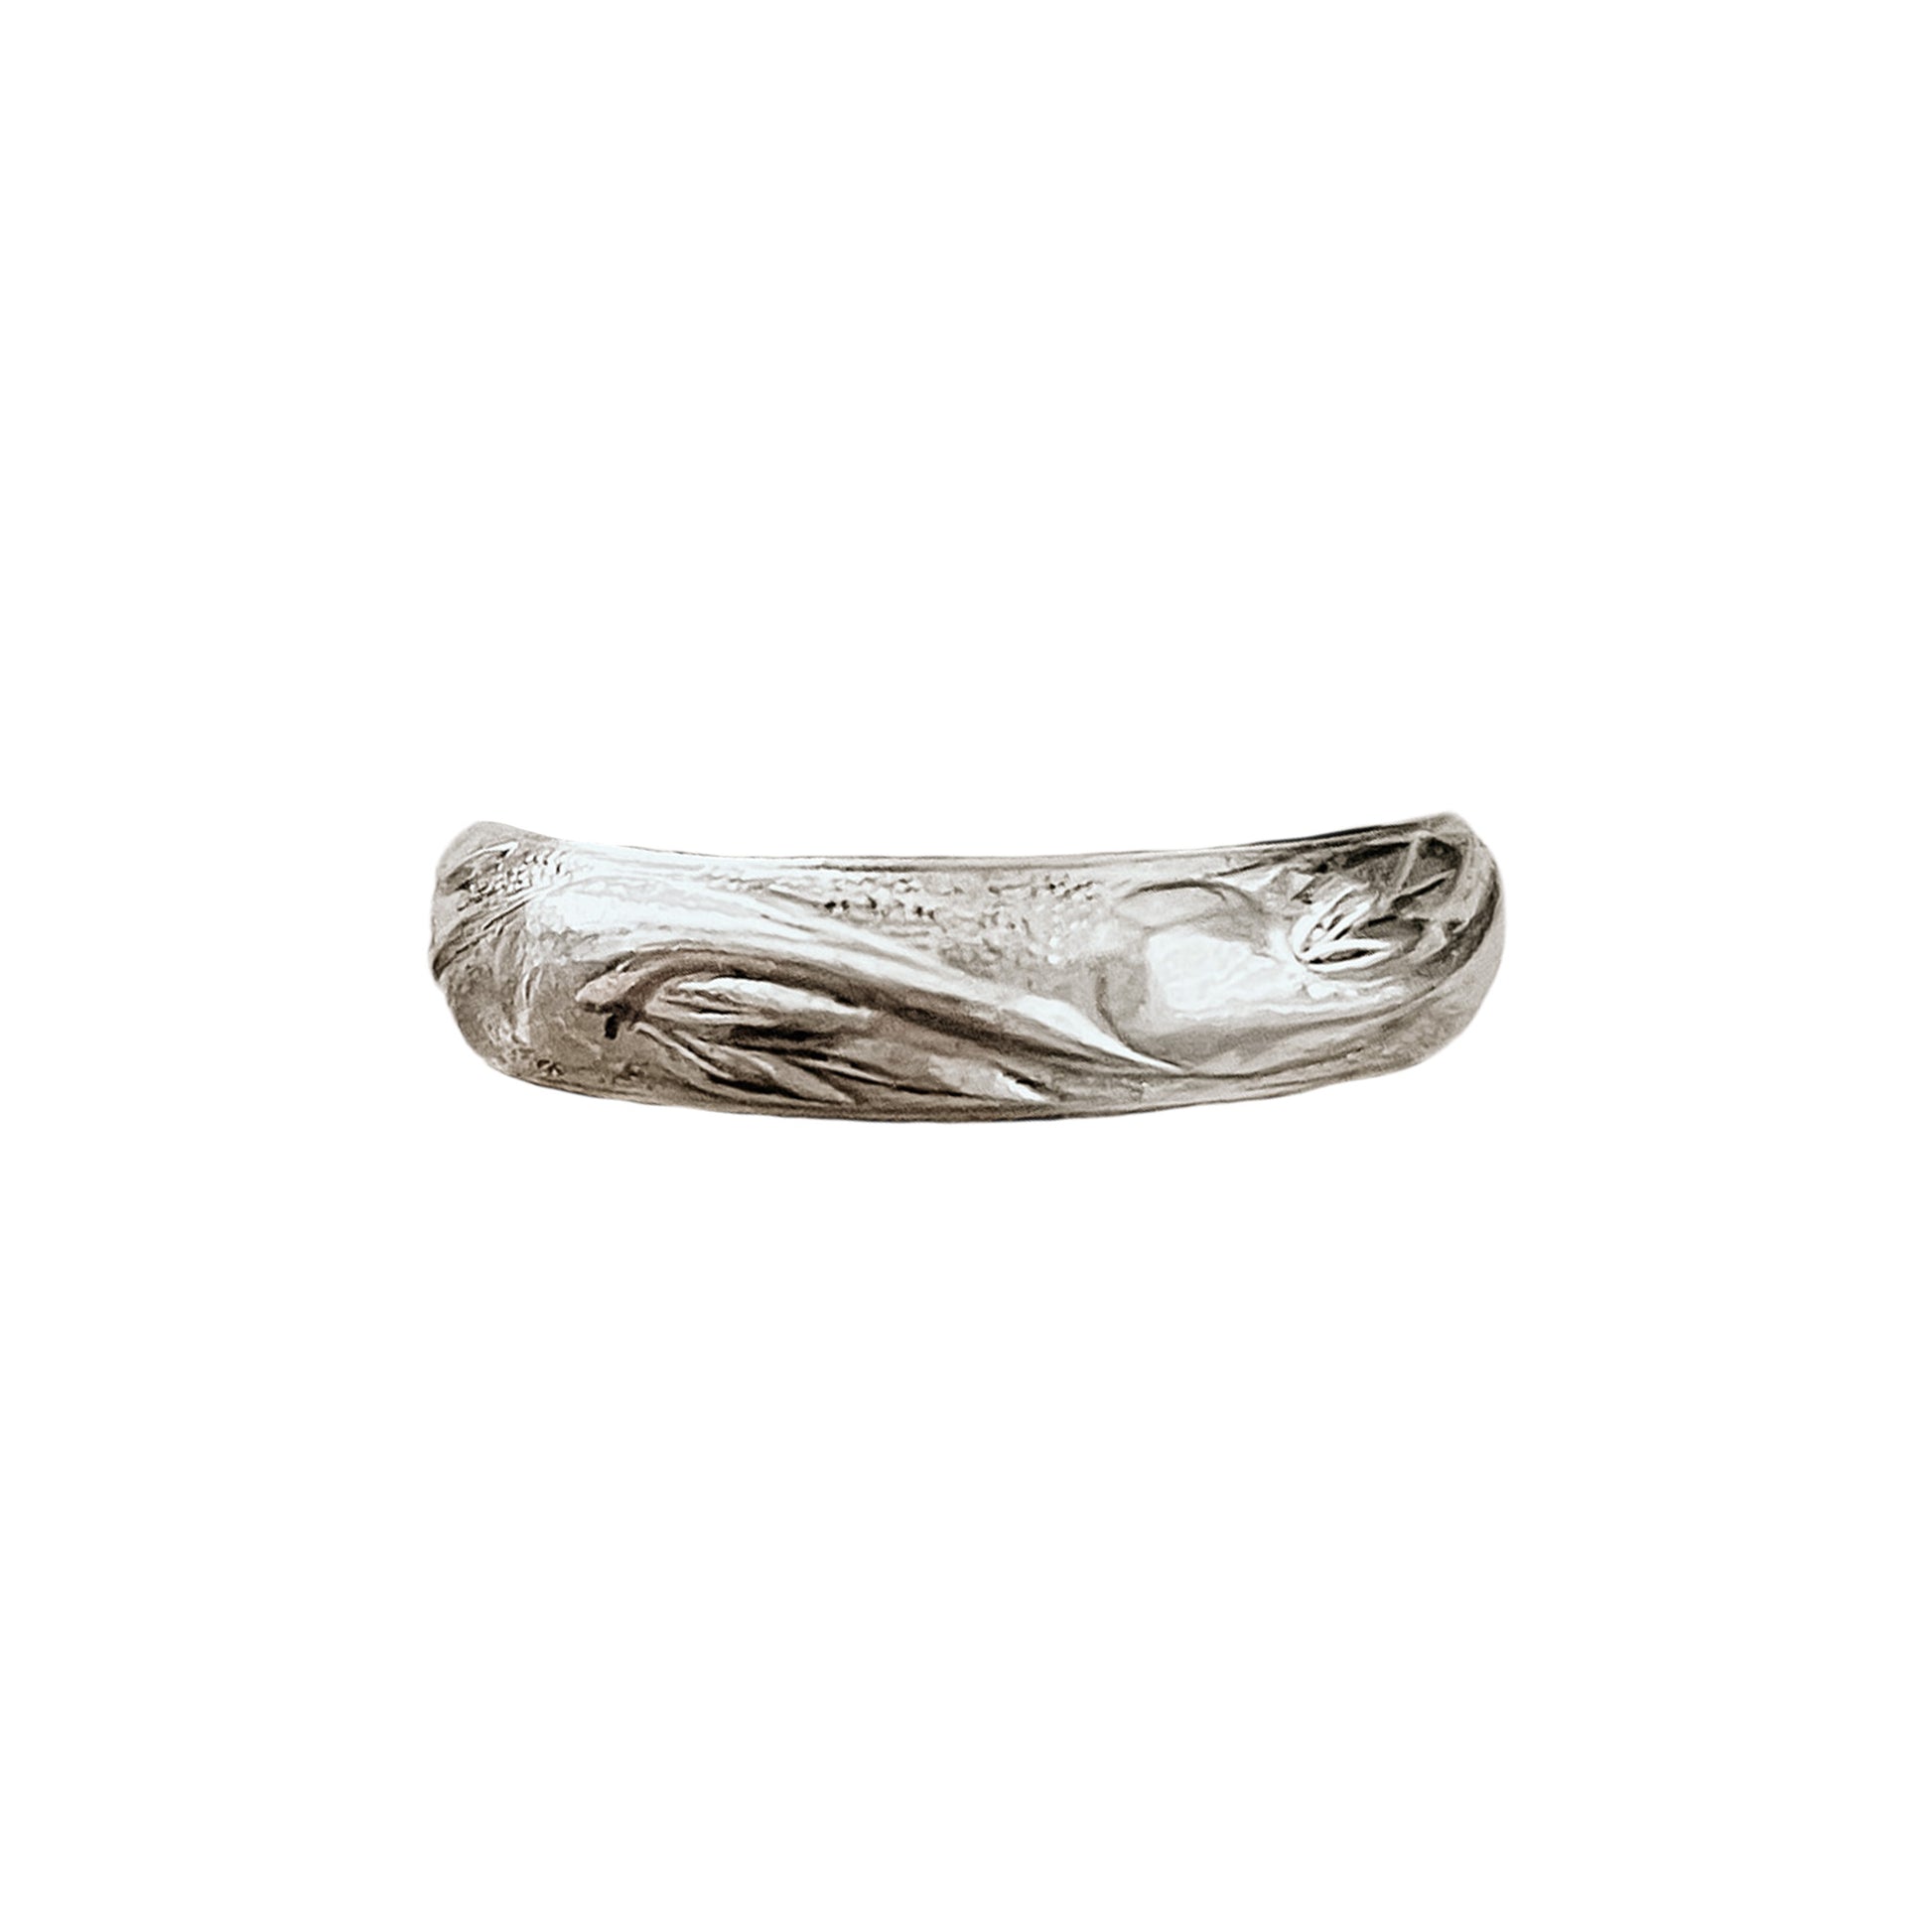 Western Nouveau Stacking Ring shown in bright finish.